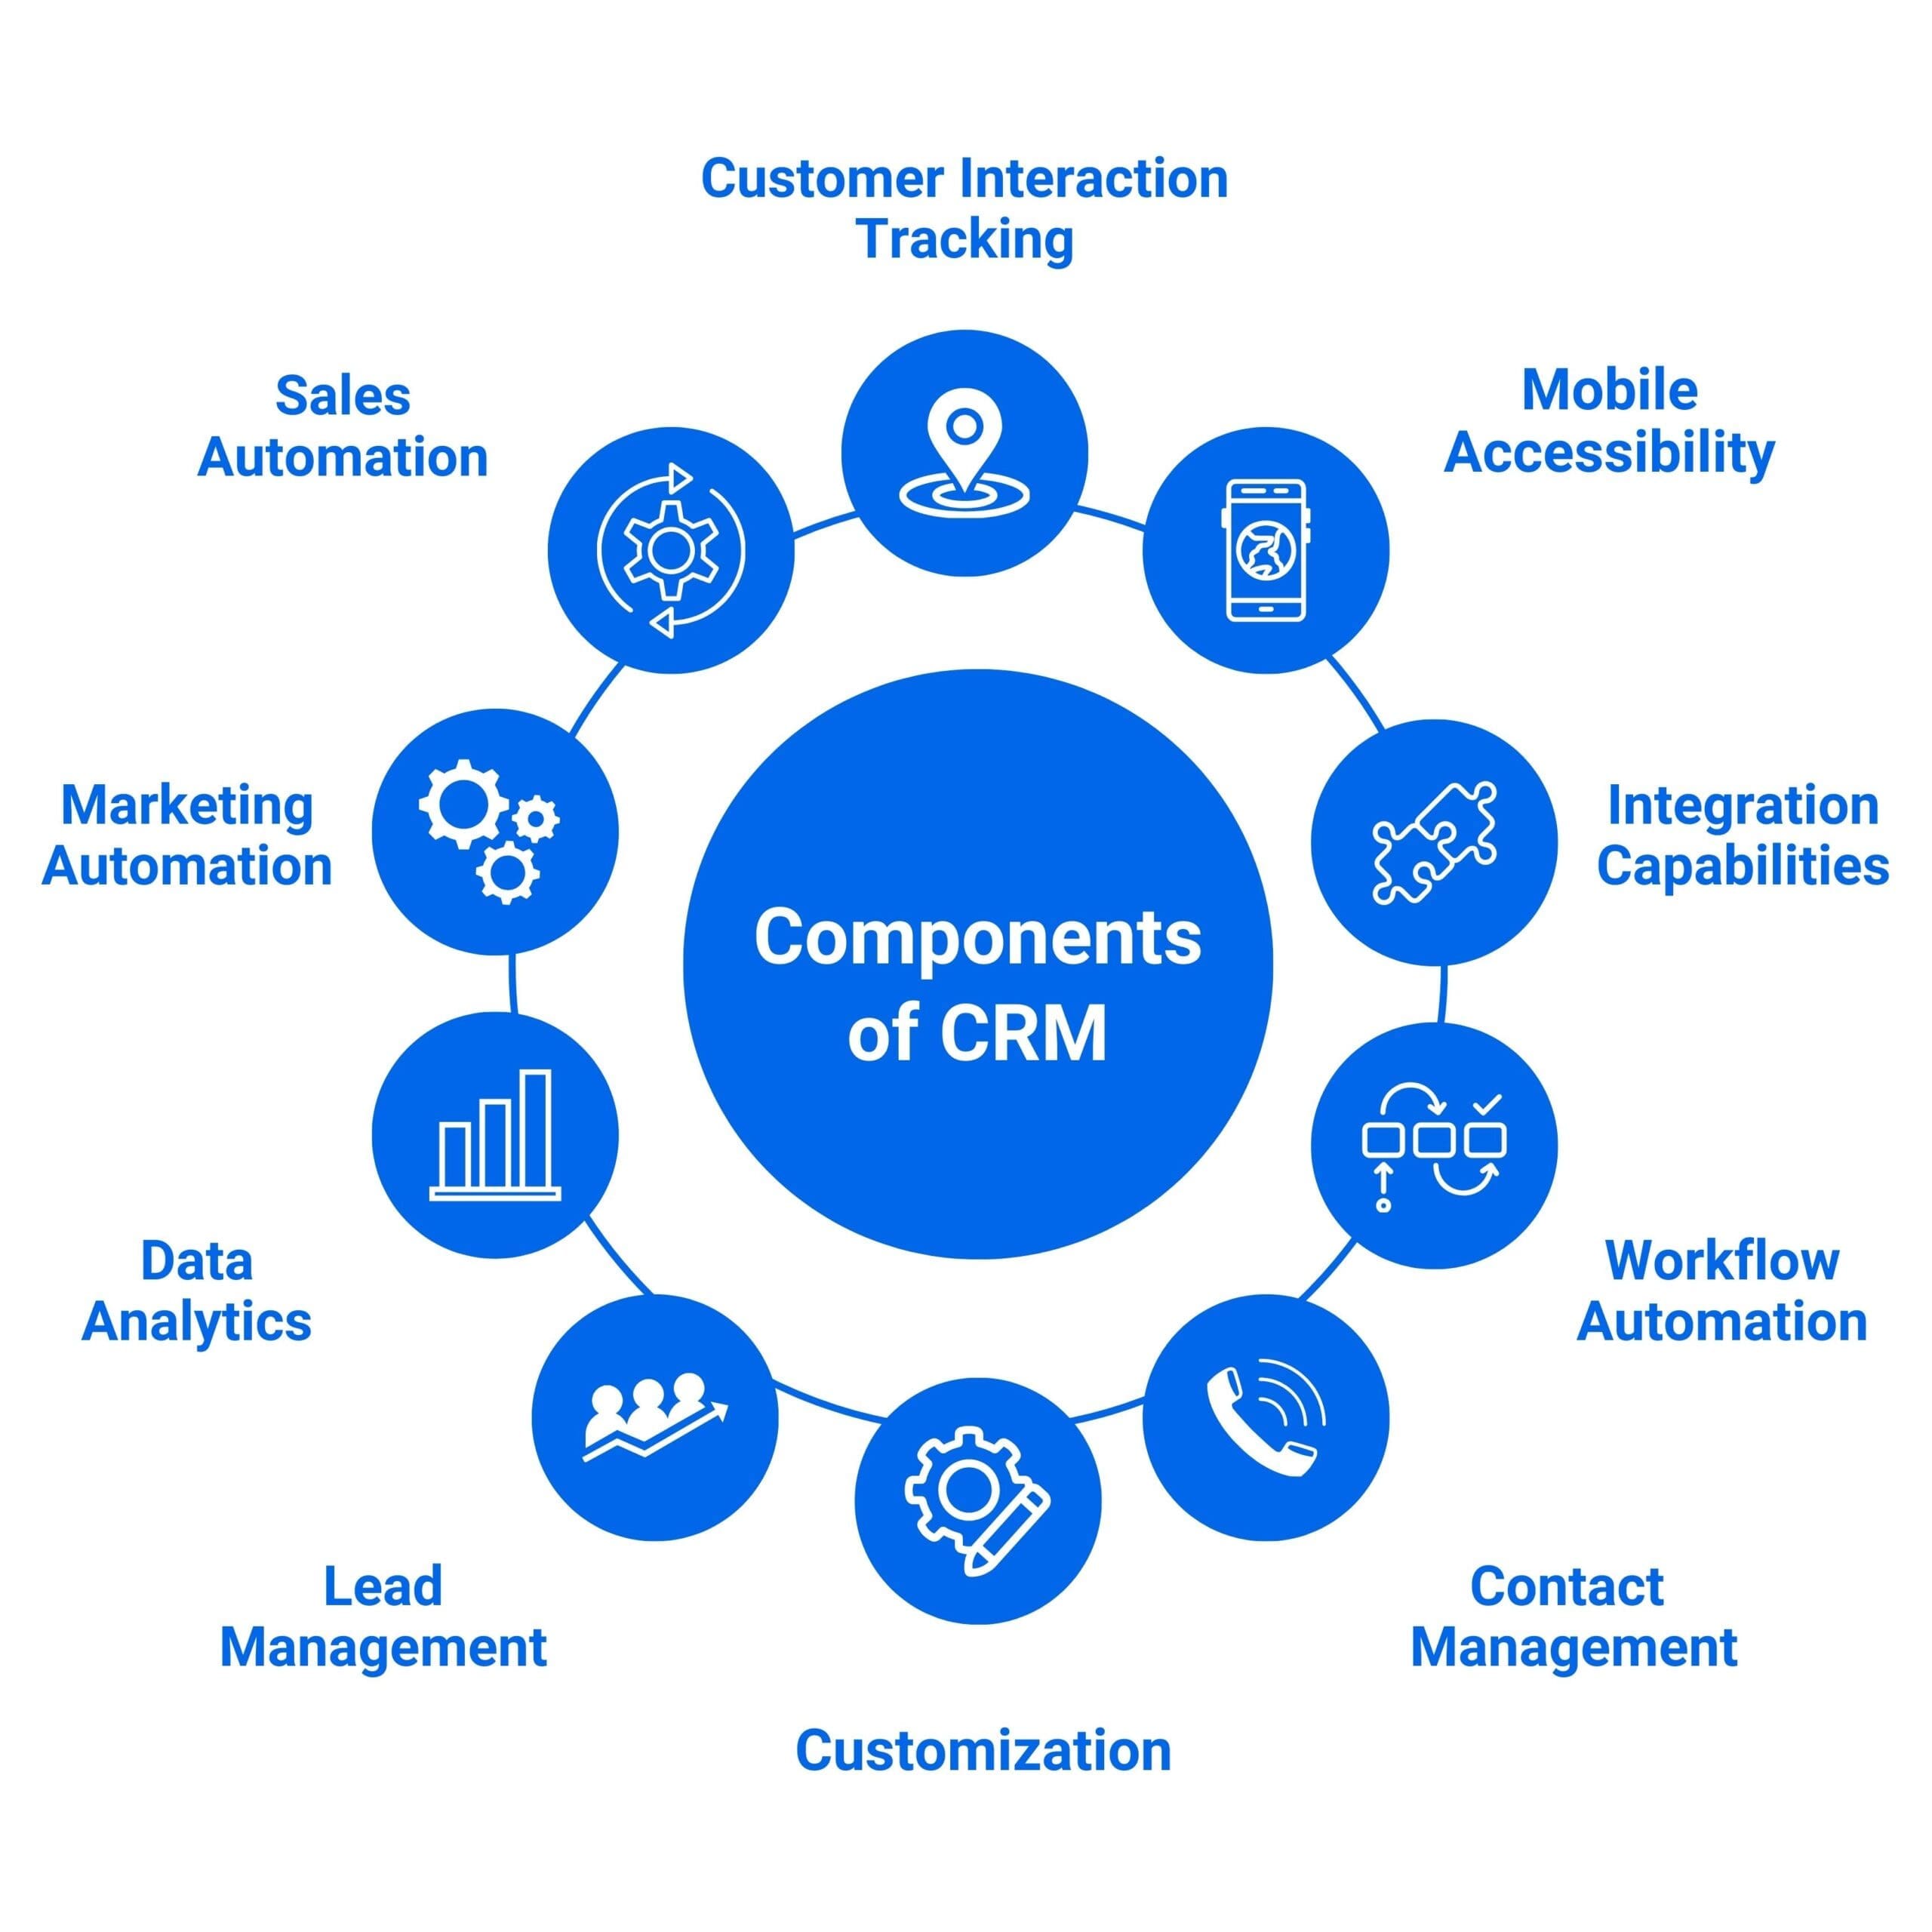 Components of CRM